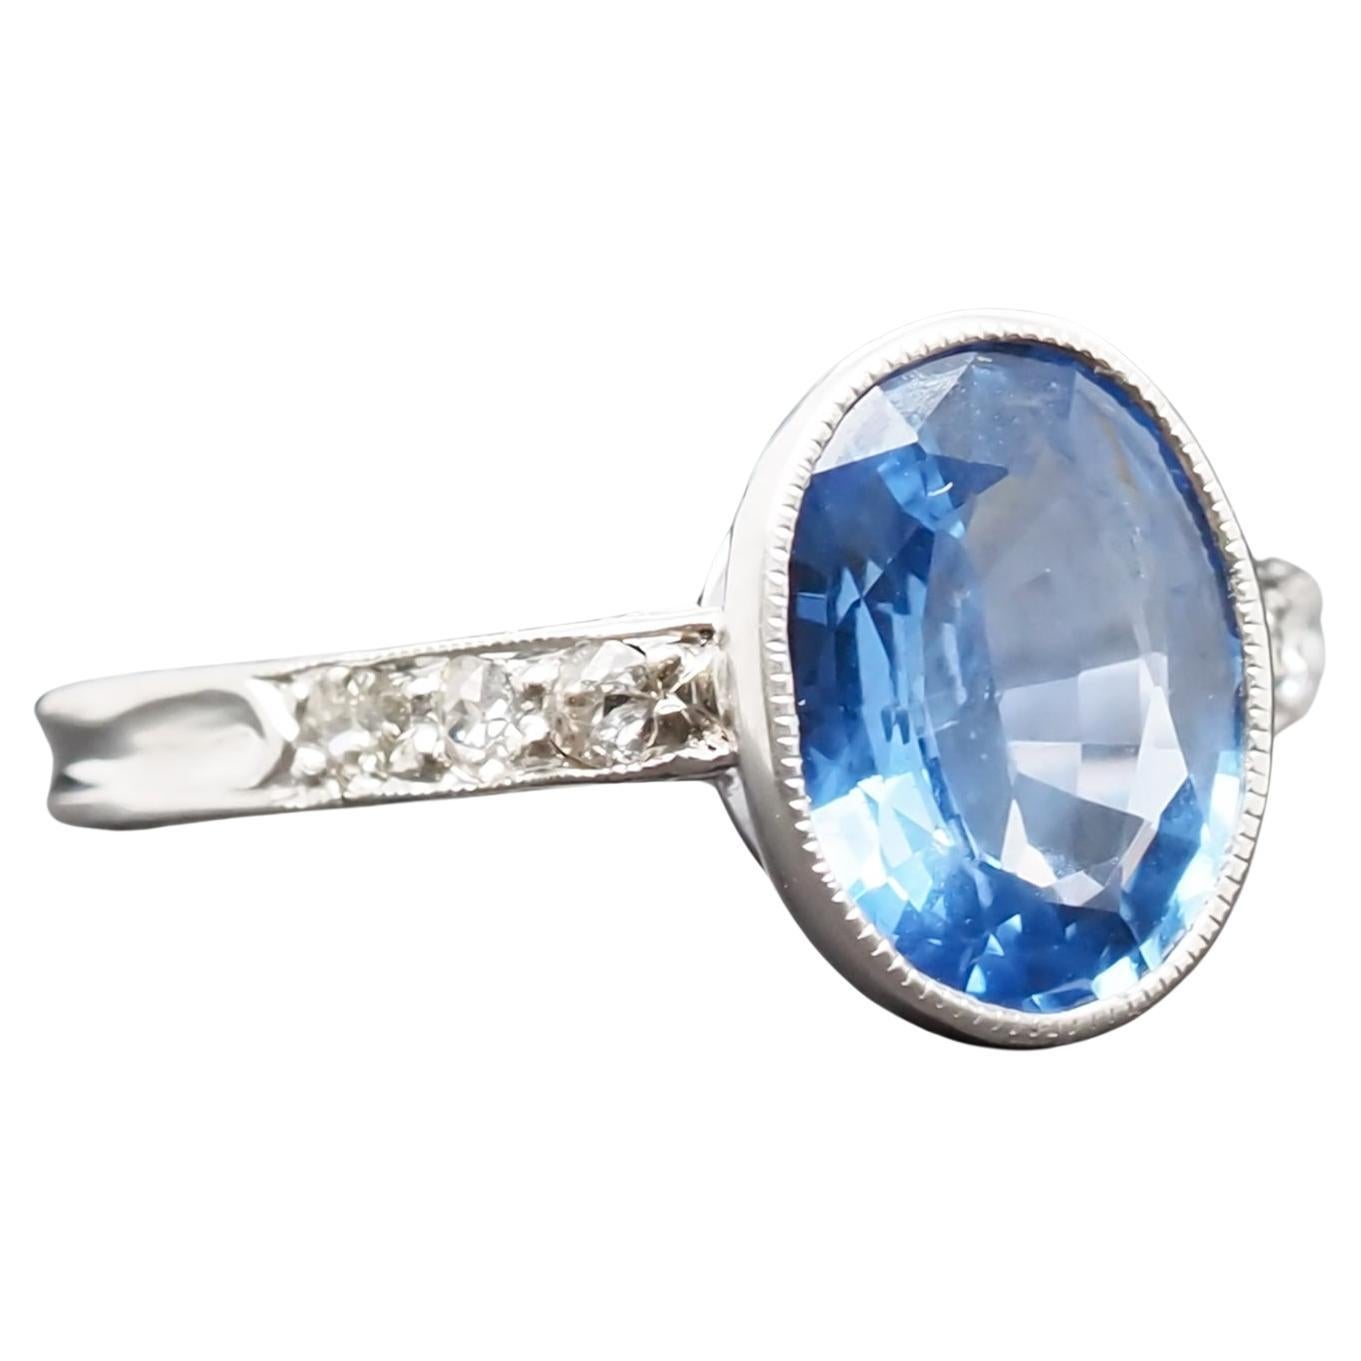 Year: 1920s

Item Details:
Ring Size: 5.25
Metal Type: Platinum [Hallmarked, and Tested]
Weight: 3.2 grams

Sapphire Details:

GIA Report #5212416100

Weight: 2.42ct

Measurement: 9.83mm x 7.56mm x 3.79mm

Type: Natural Sapphire, Unheated, Blue